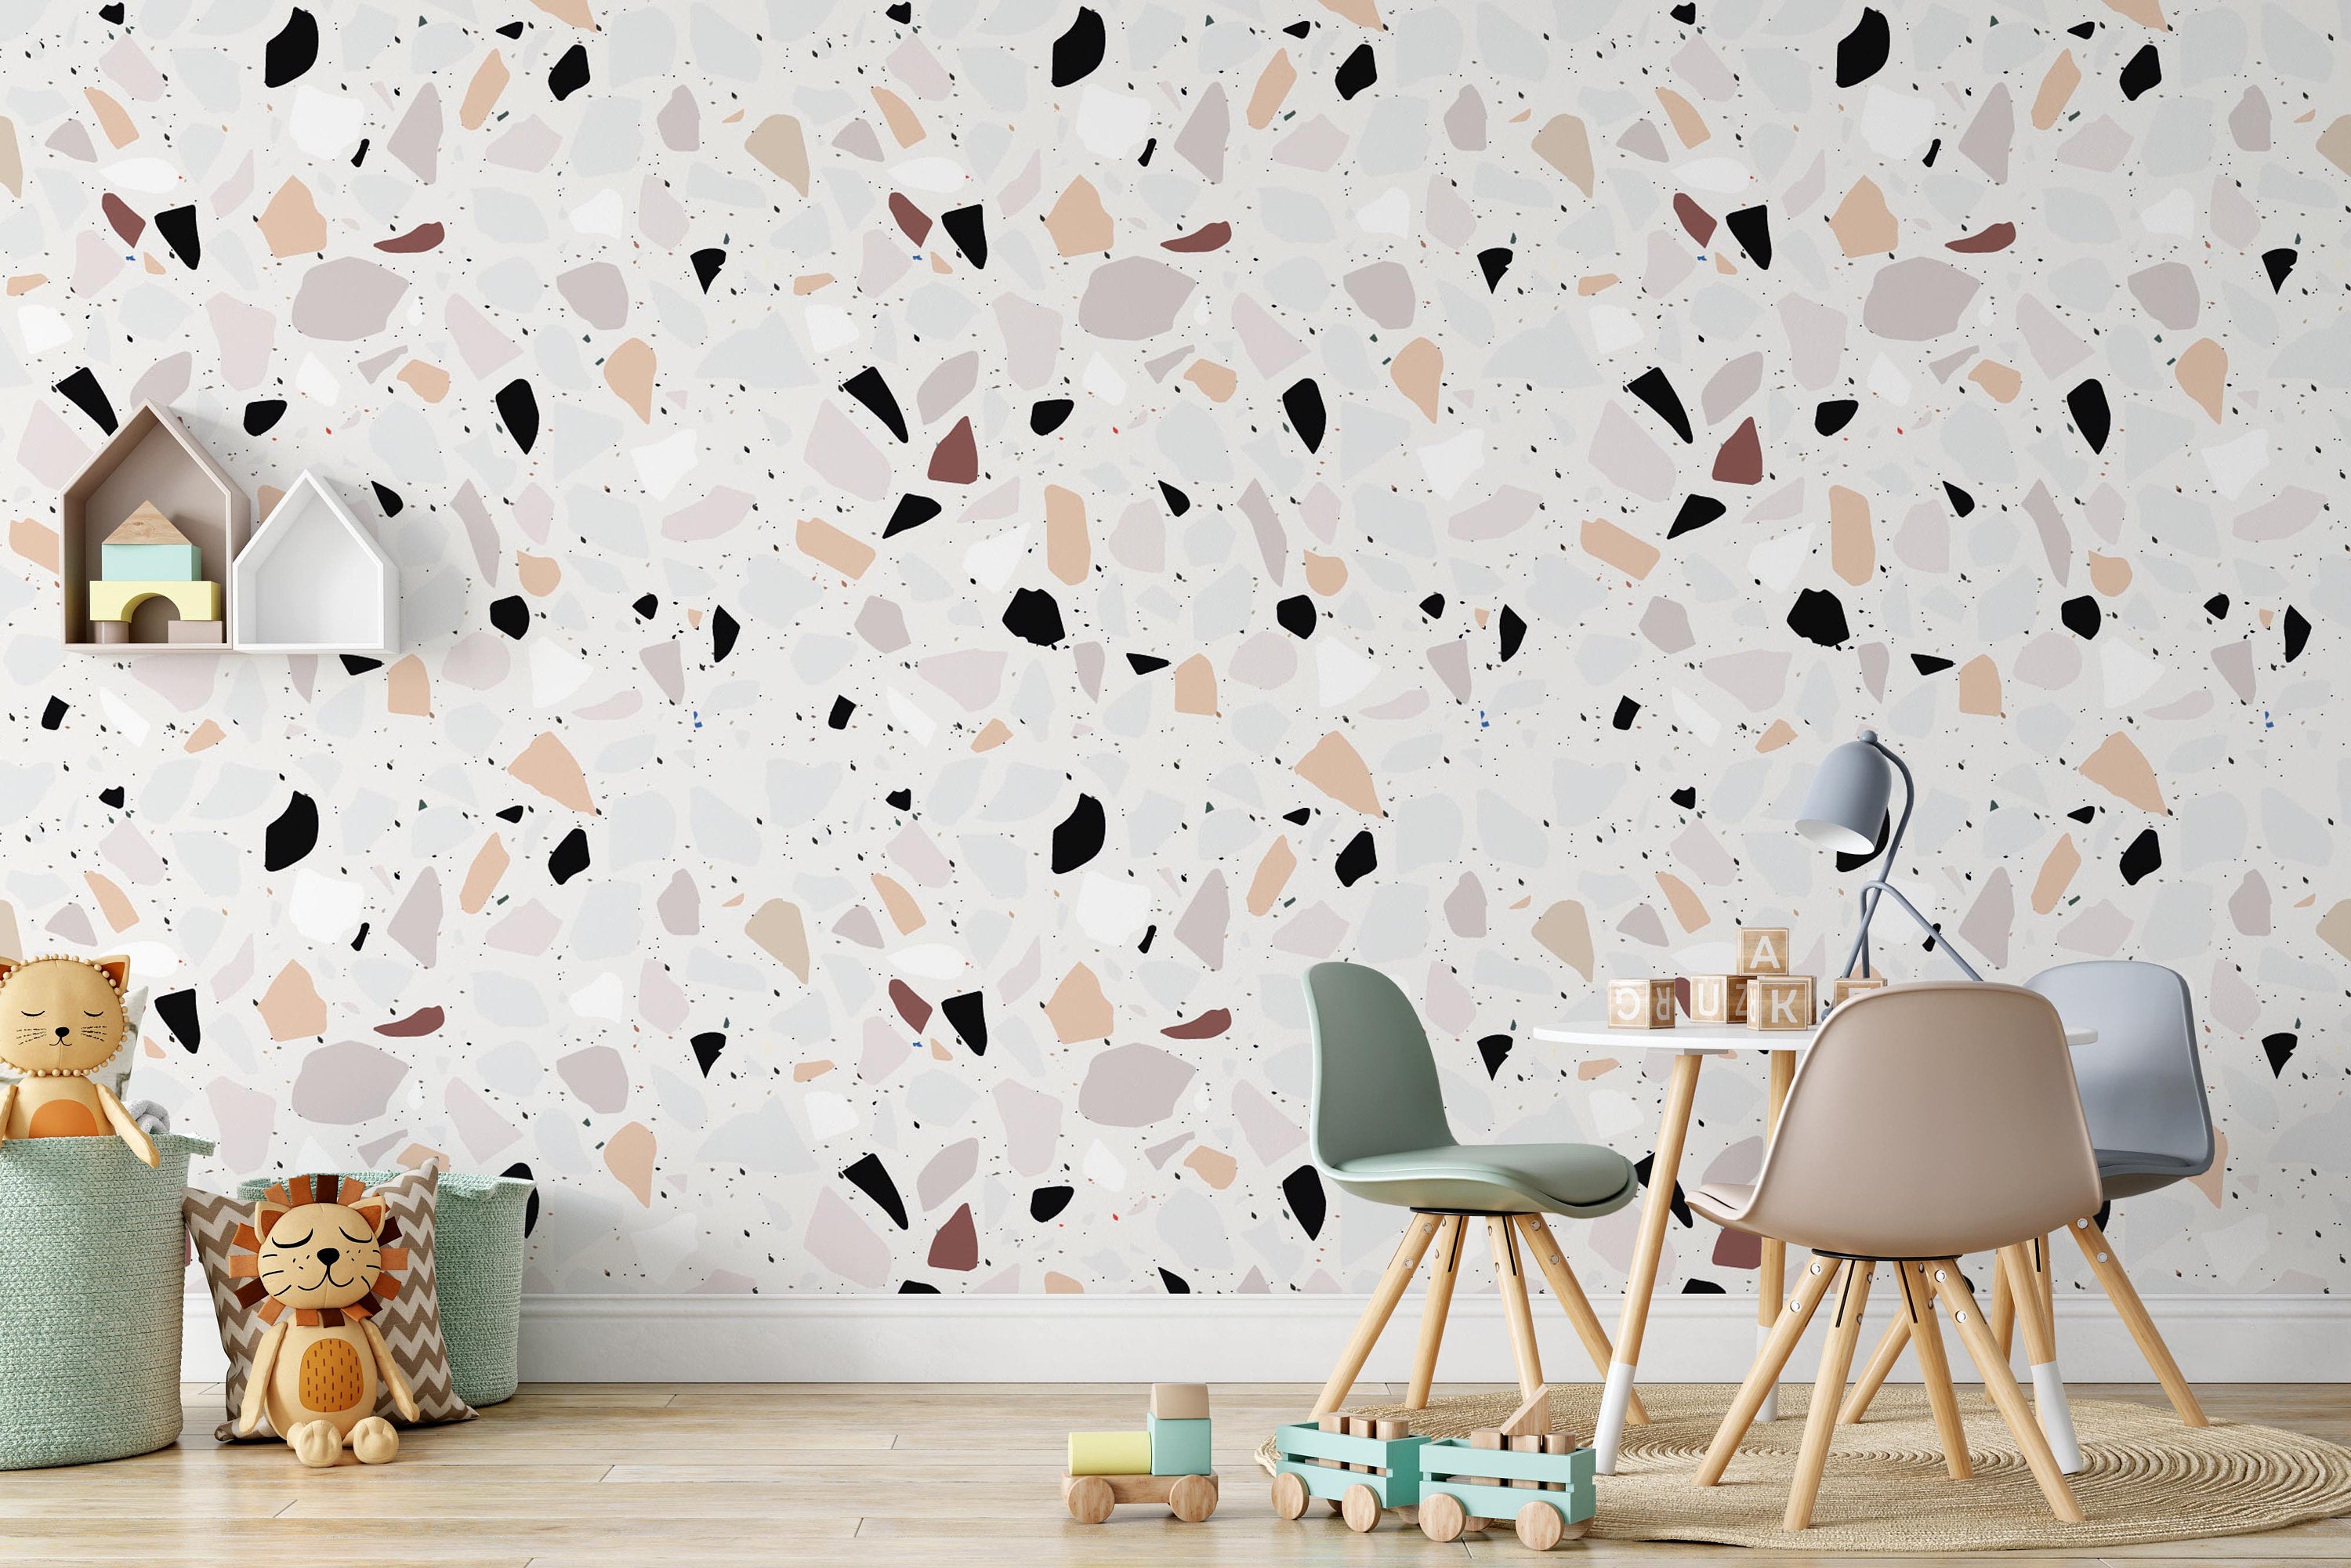 Abstract Venetian Terrazzo Imitation Pattern Stone Fragments Wallpaper Self Adhesive Peel and Stick Wall Sticker Wall Decoration Removable